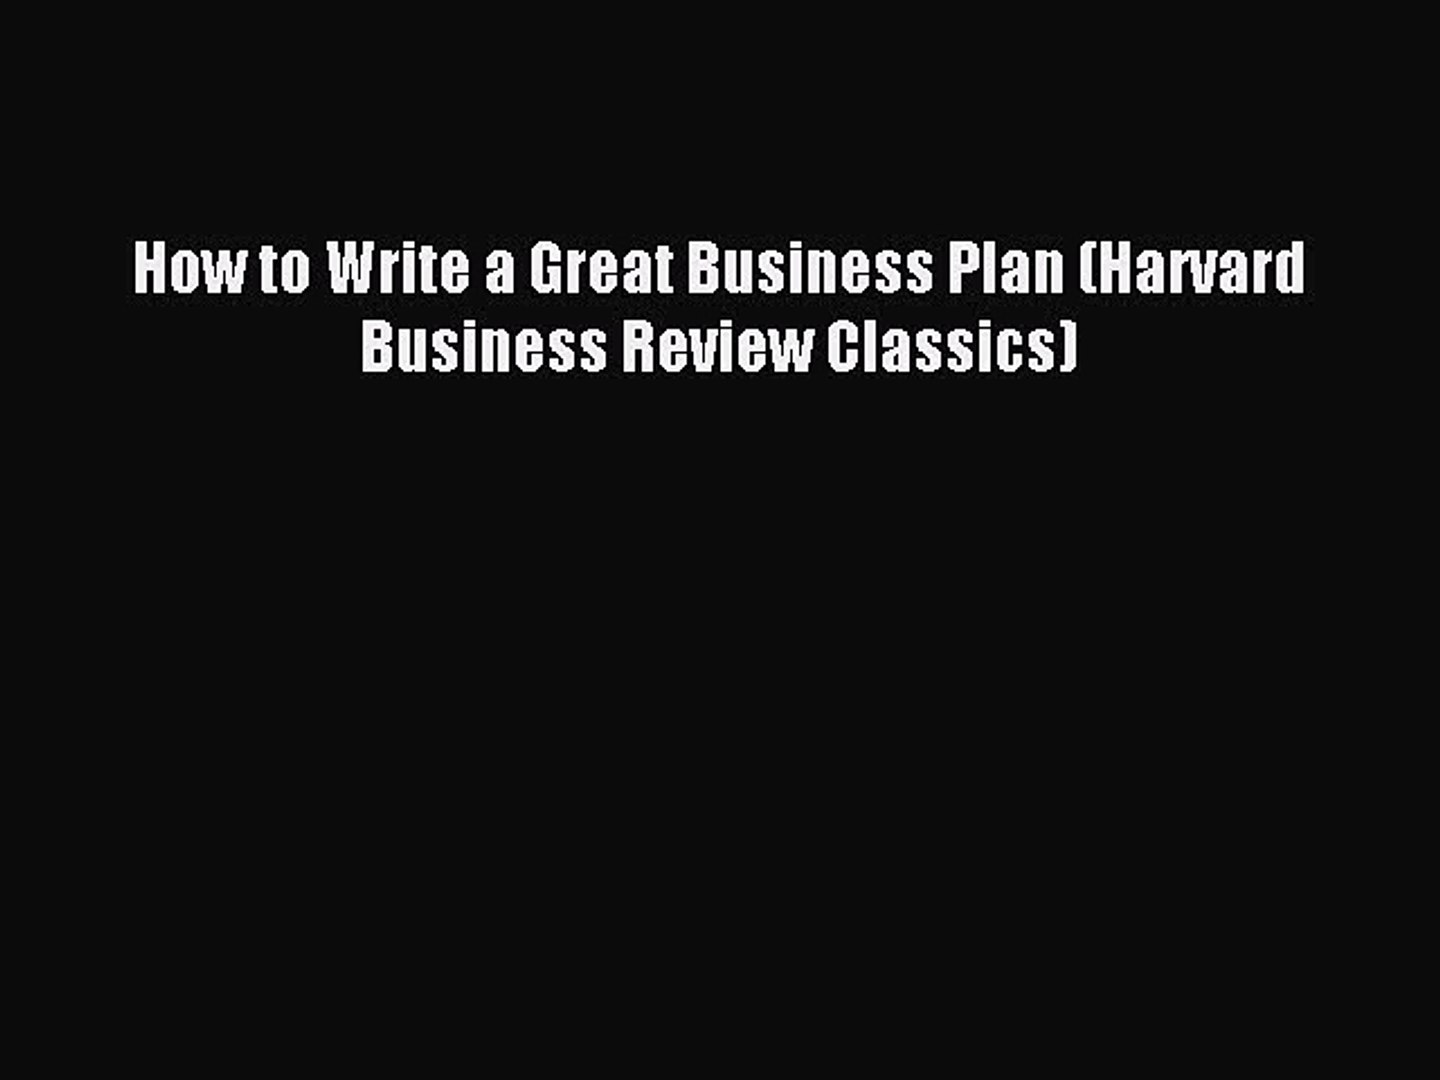 Read How to Write a Great Business Plan (Harvard Business Review